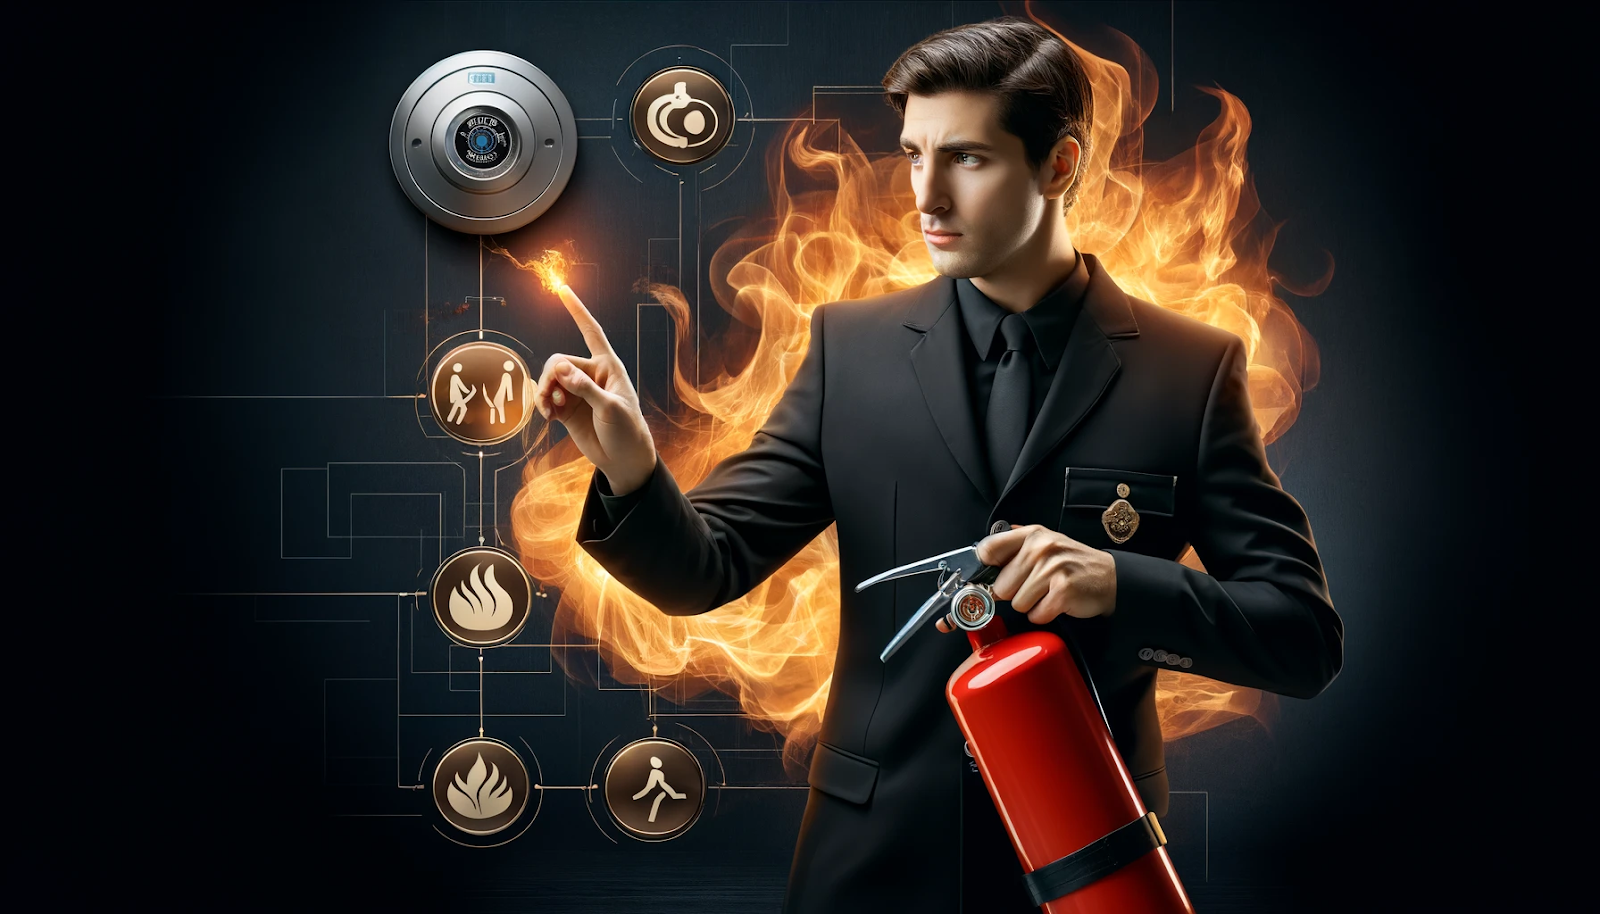 This image is a photorealistic depiction symbolizing fire safety training for security personnel. Dominated by black and gold tones.